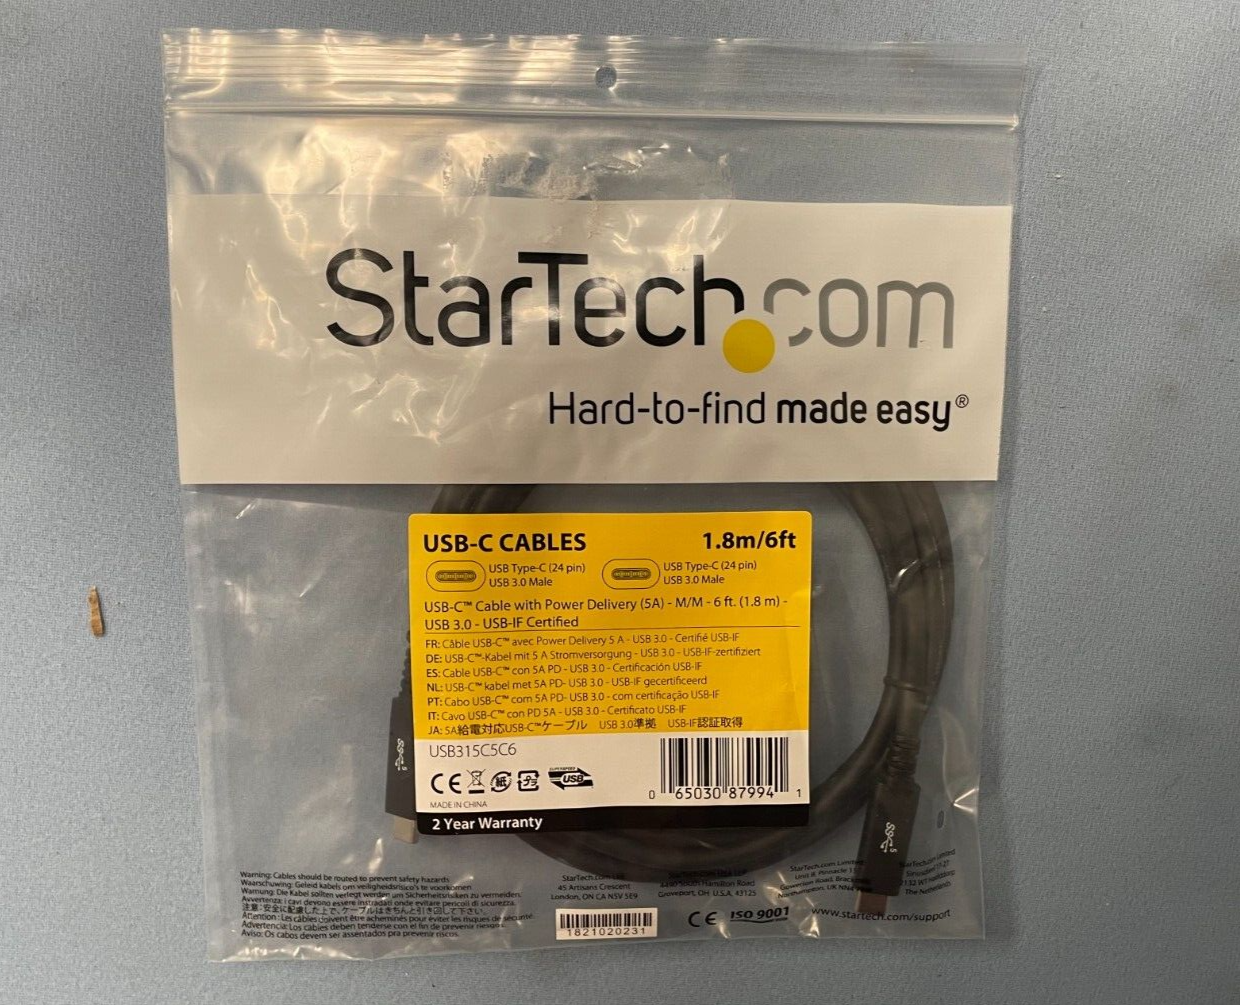 Startech USB-C to USB-C cables